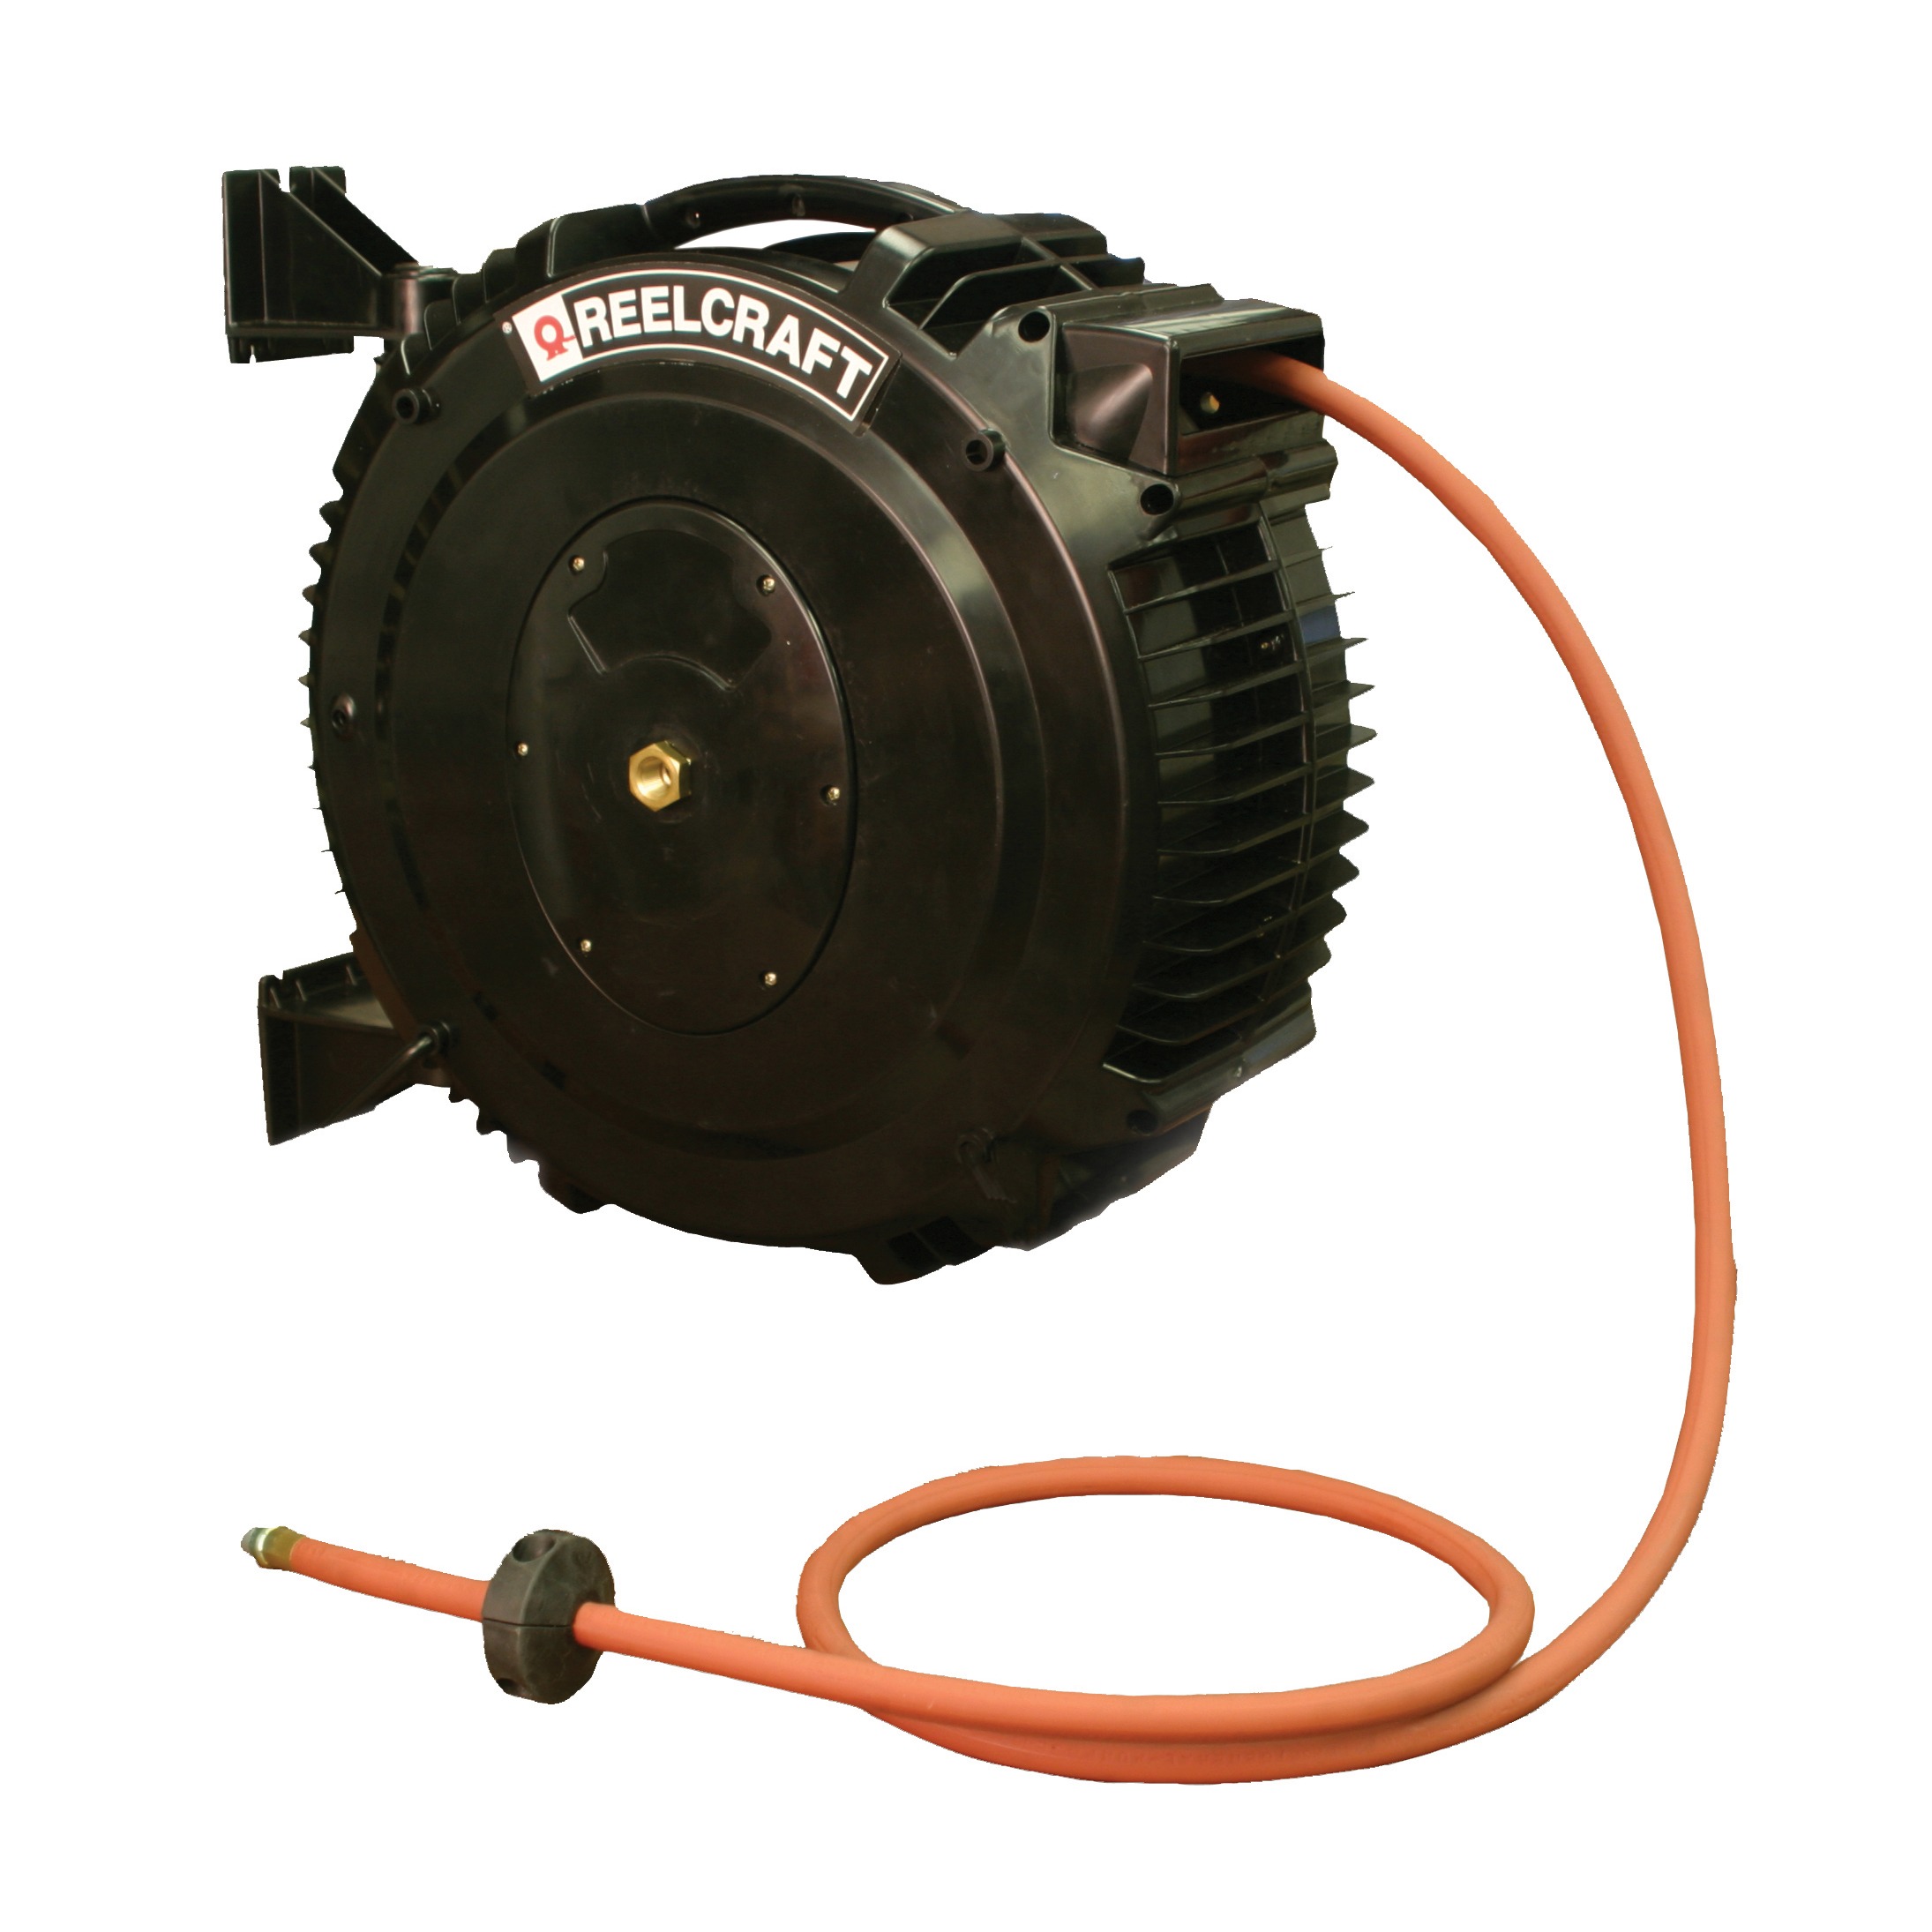 SGA3650 OLP - Air / Water Hose Reels  Motion & Flow Control Products, Inc.